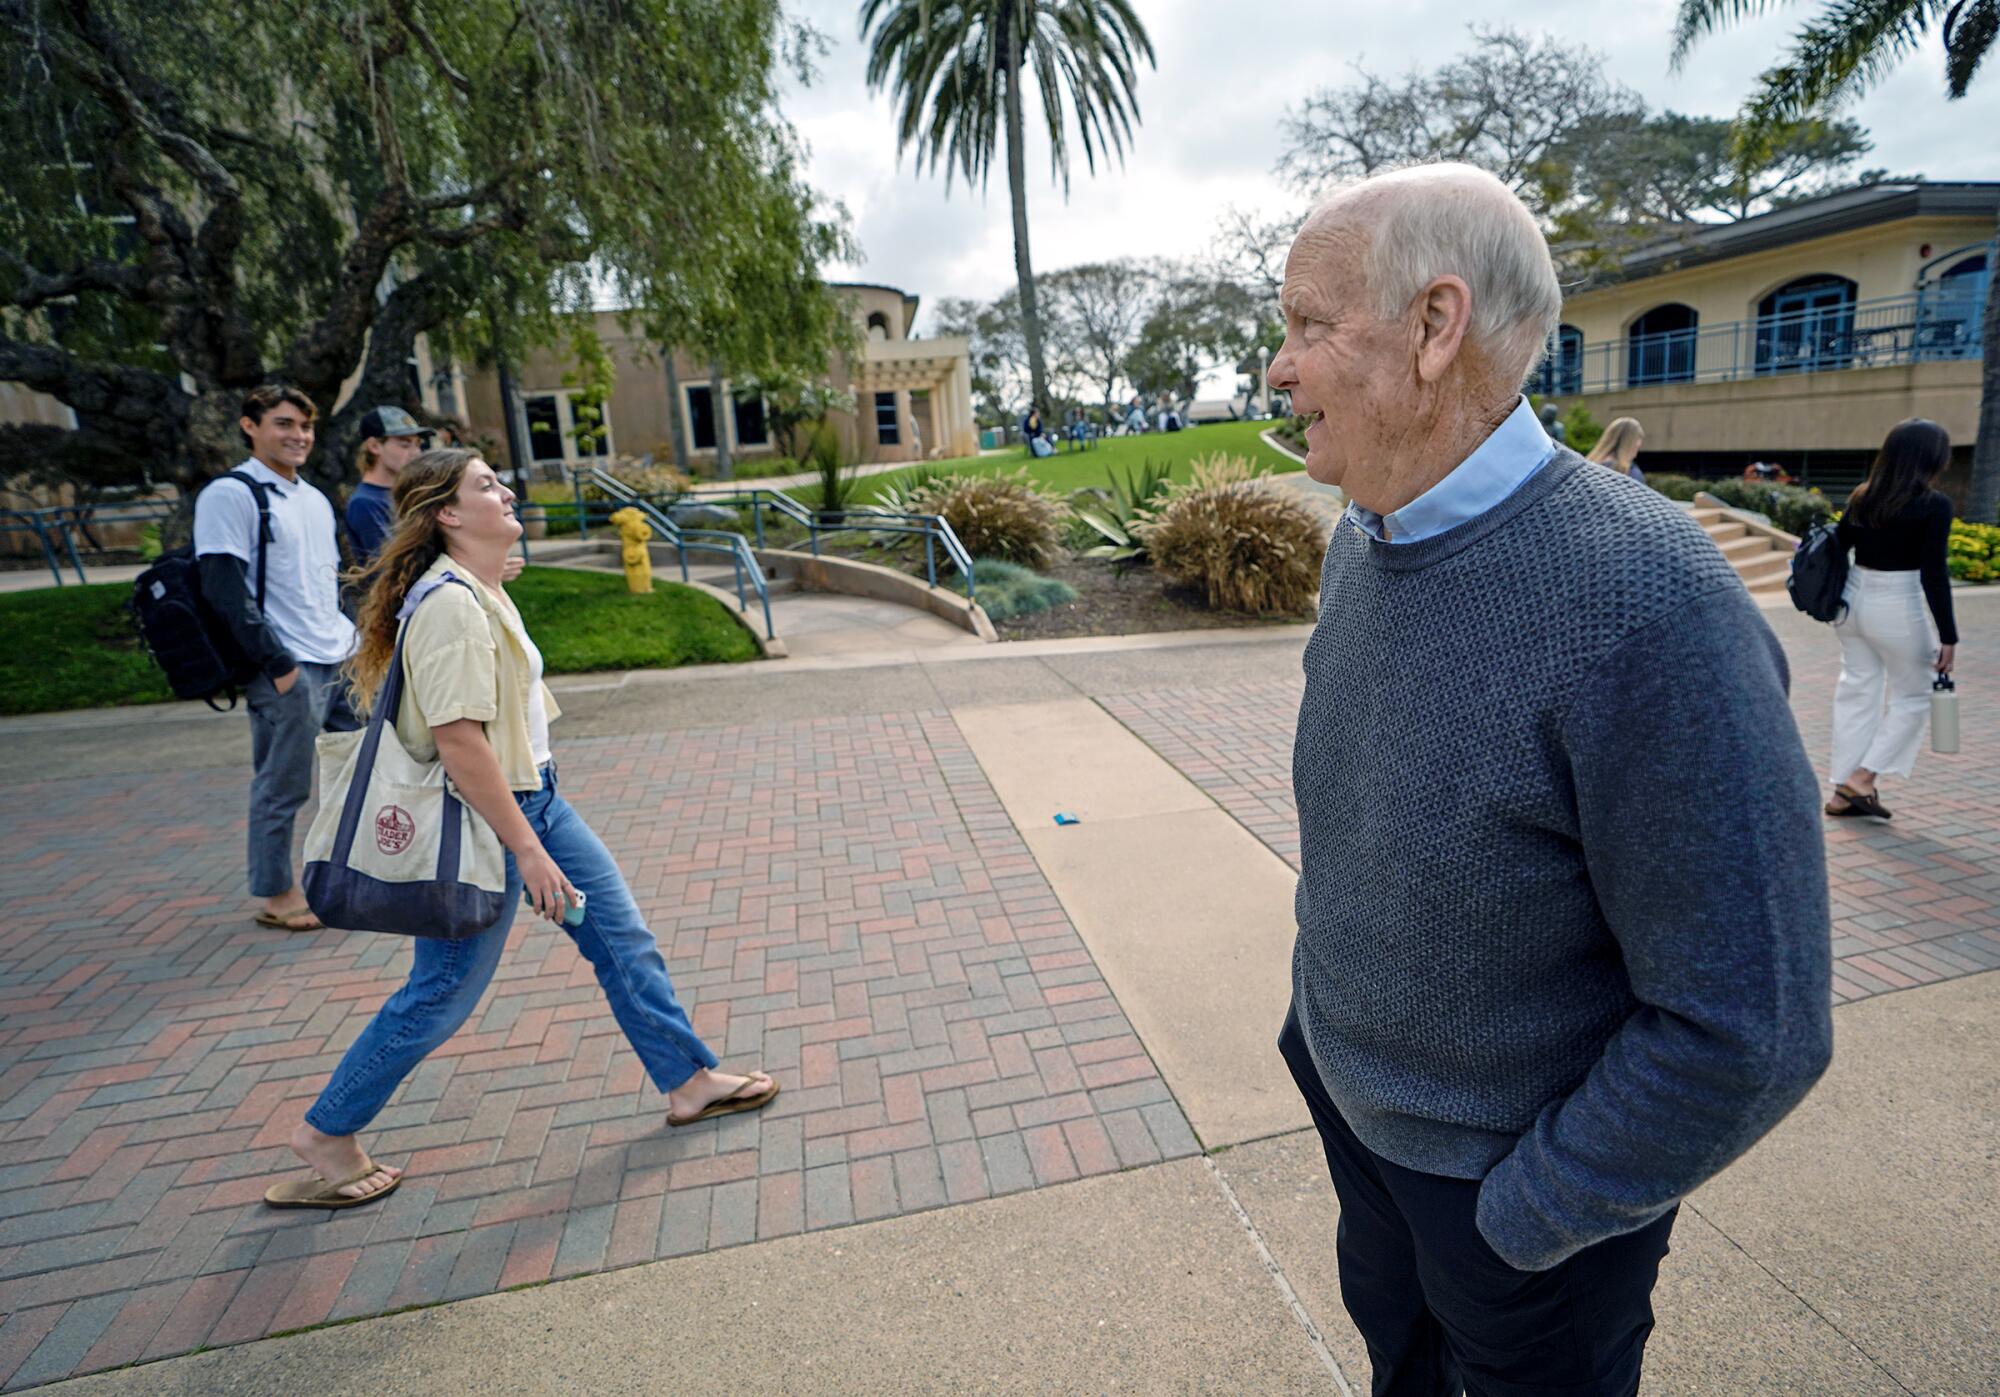 An older man in a sweater smiles as he greets college students on a campus walkway.